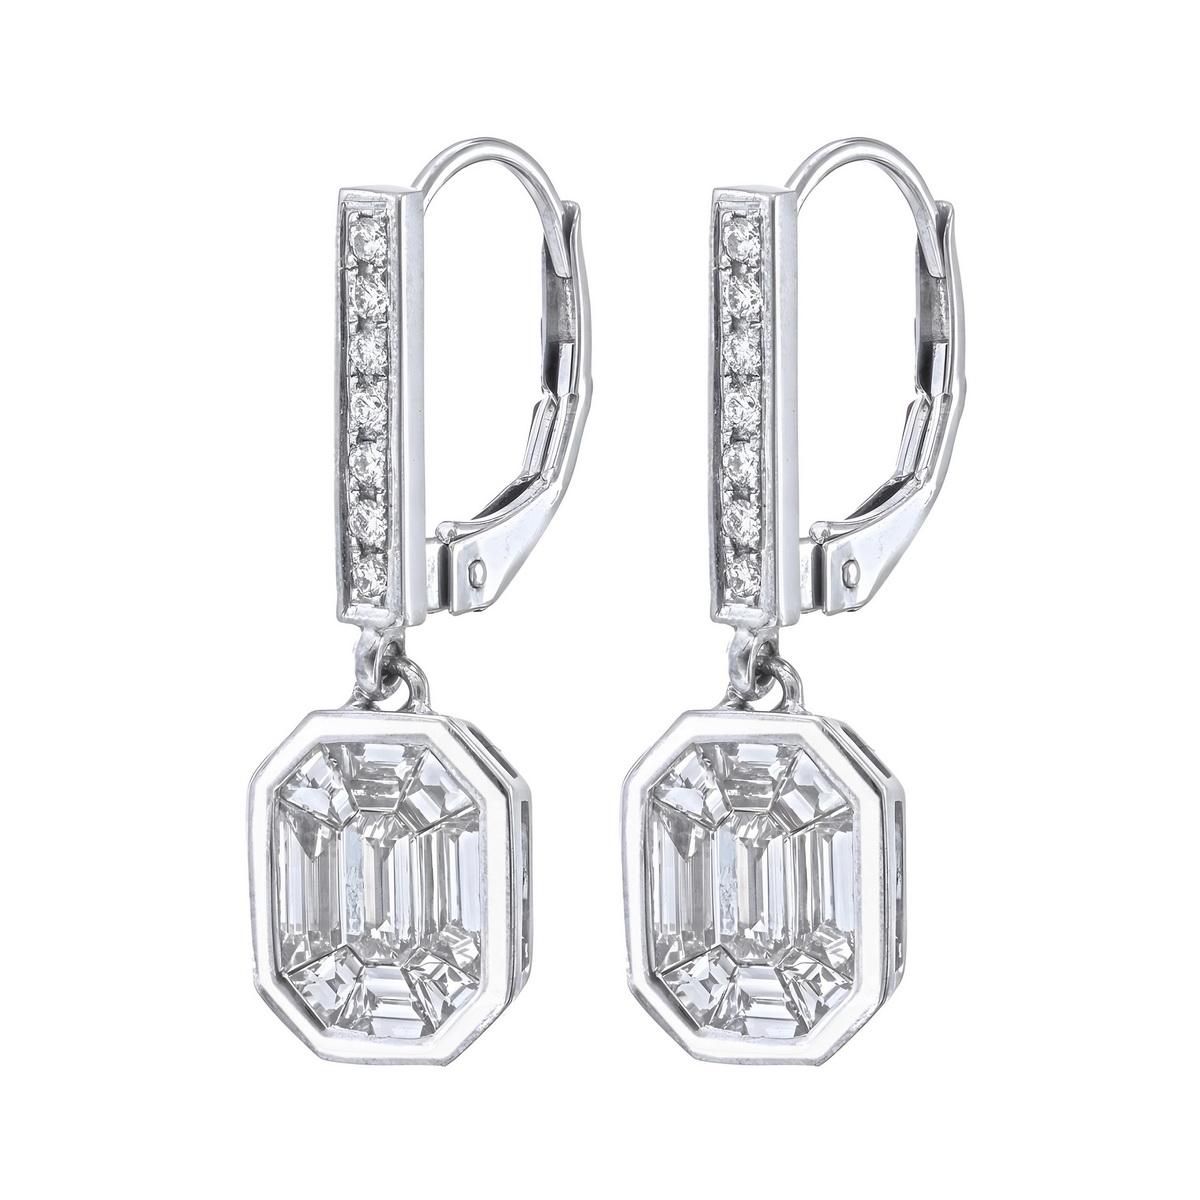 Artisan French lever back earrings with 2 carat face up Invisible set diamond earrings For Sale